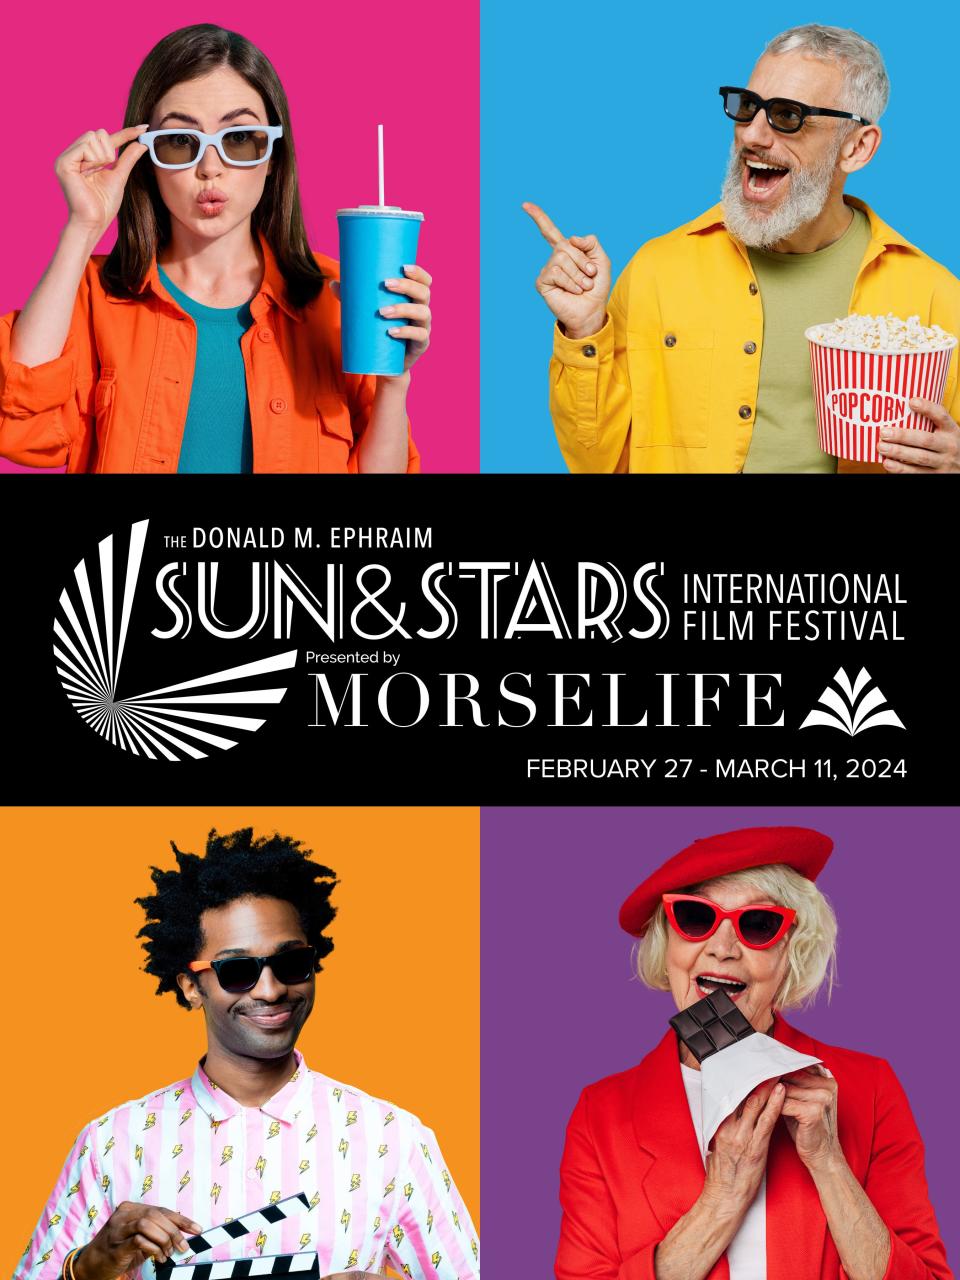 The Donald M. Ephraim Sun and Stars International Film Festival presented by MorseLife is Feb. 27 through March 11.